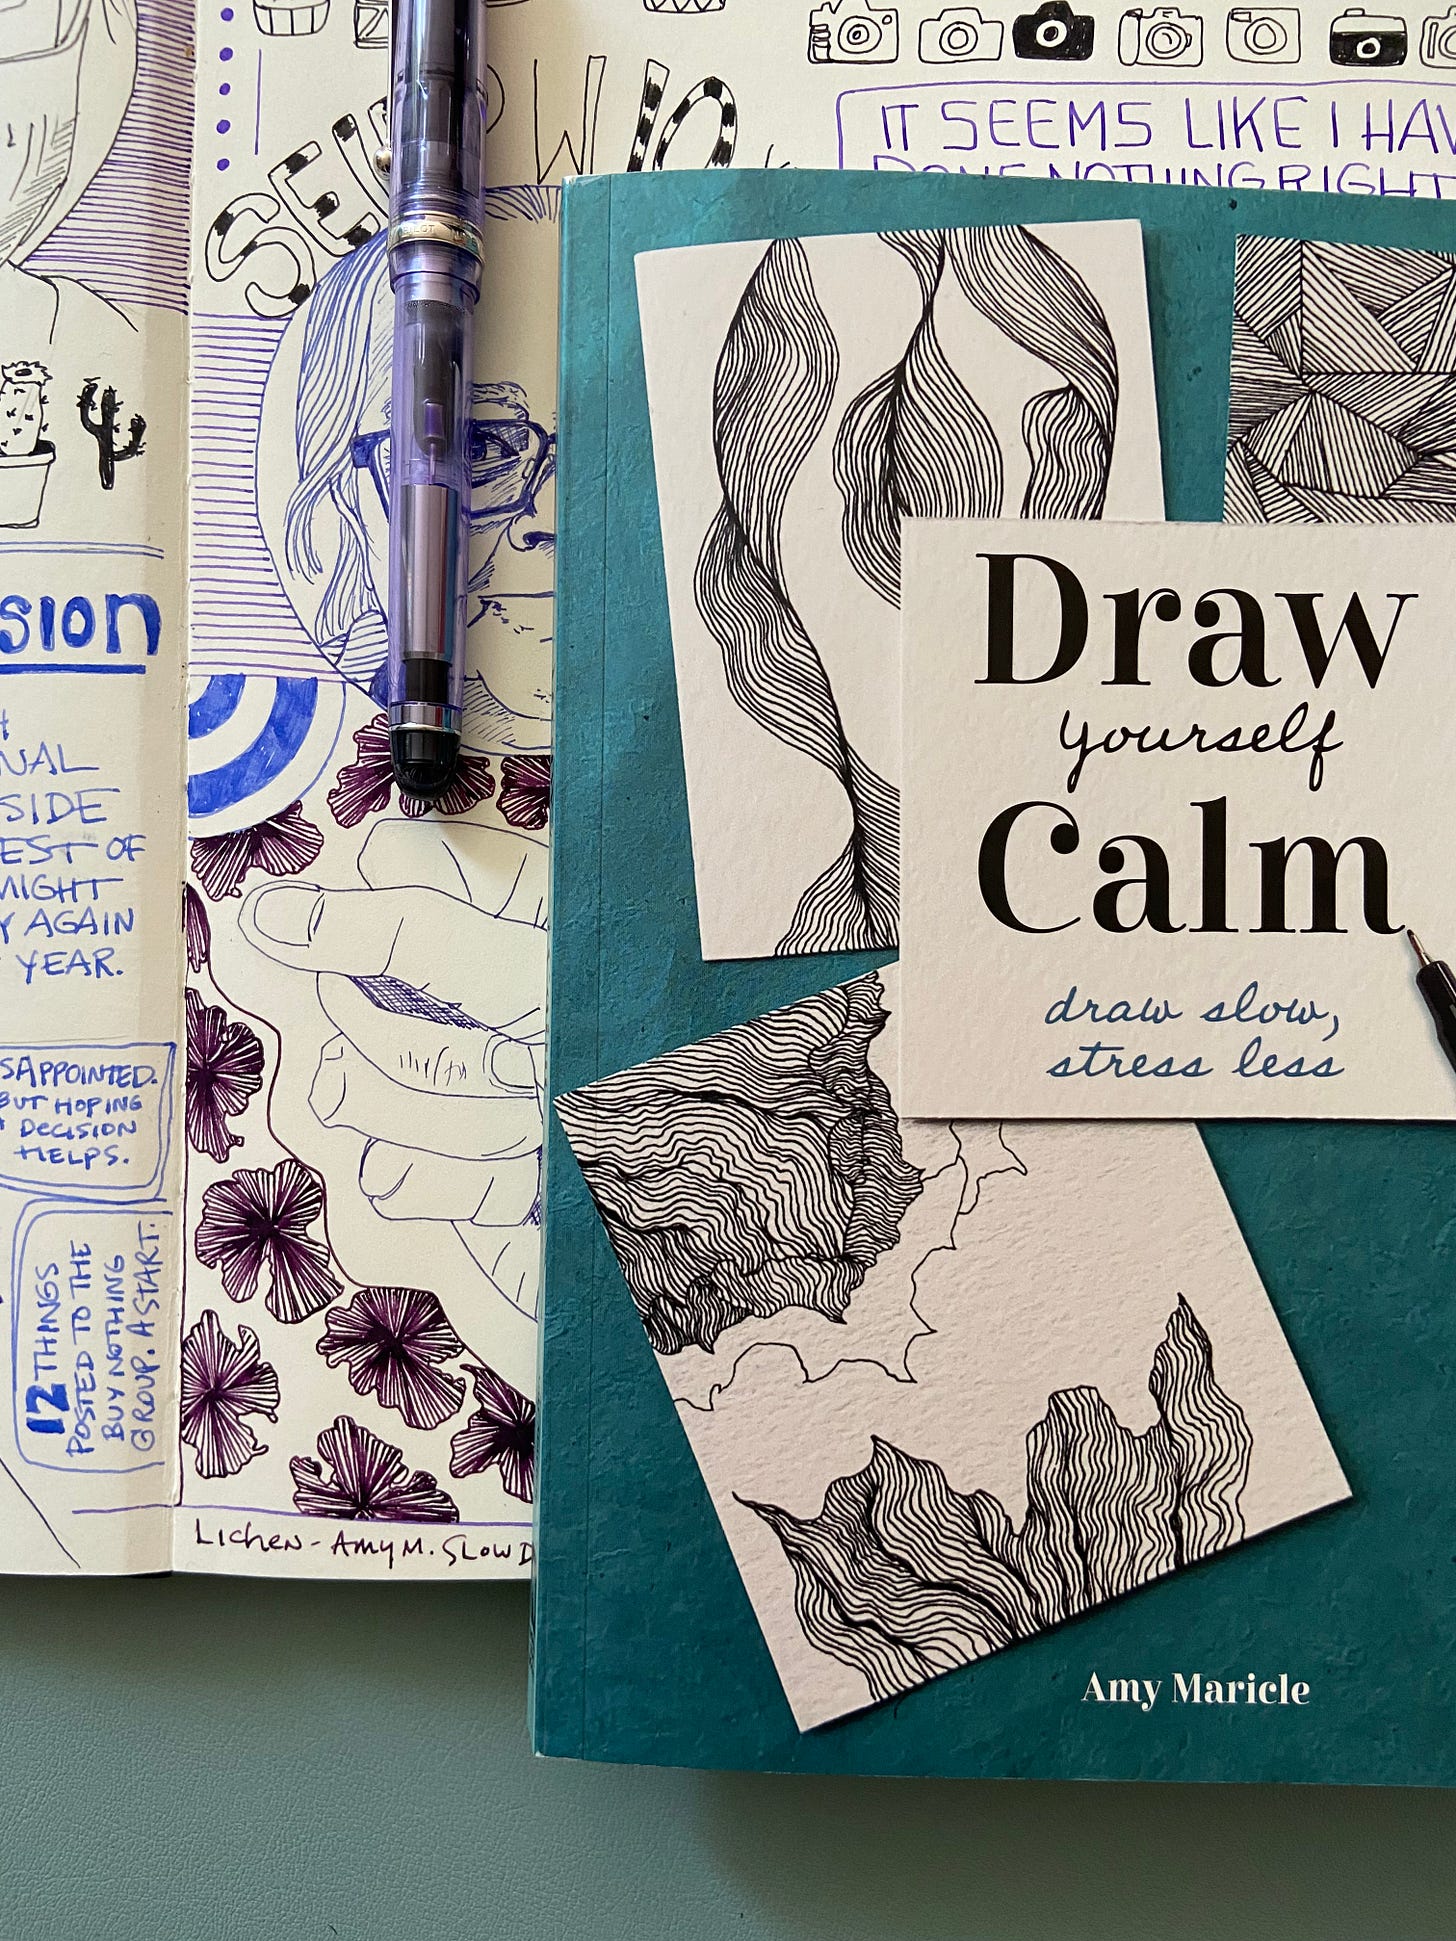 The cover of Draw Yourself Calm: Draw Slow, Stress Less by Amy Maricle